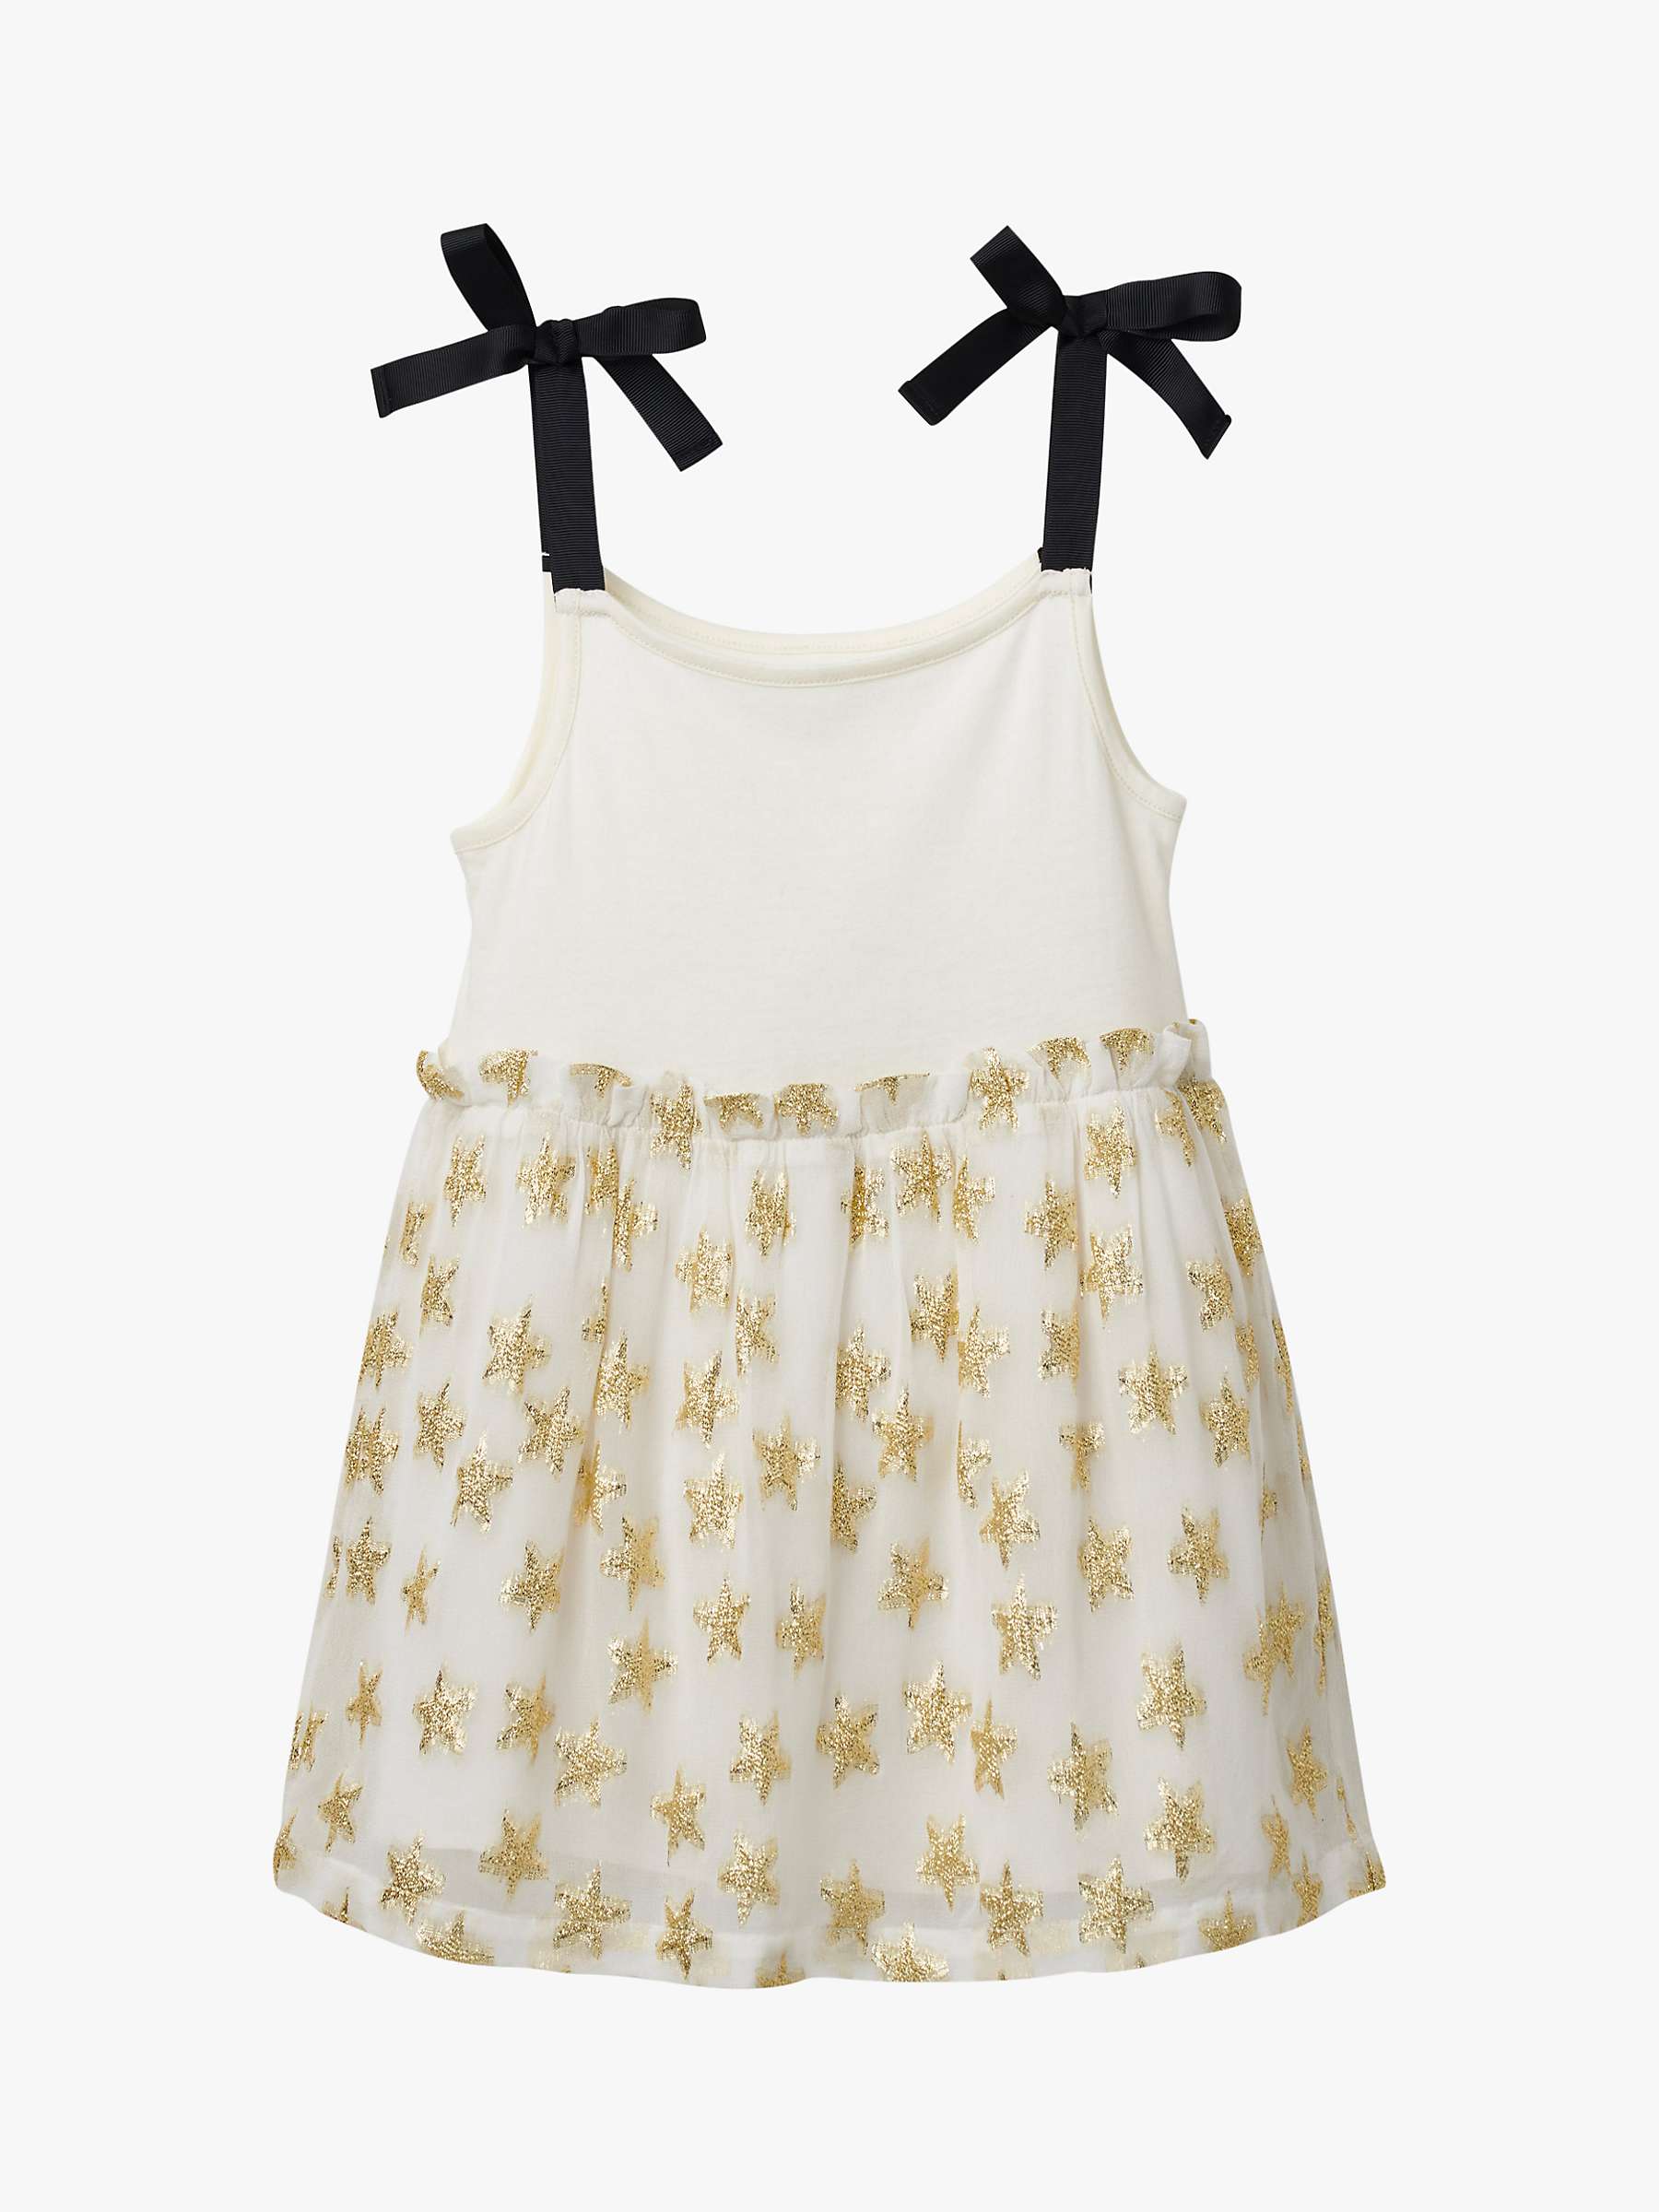 Buy Stych Kids' Pretty Luxe Star Dress, Multi Online at johnlewis.com